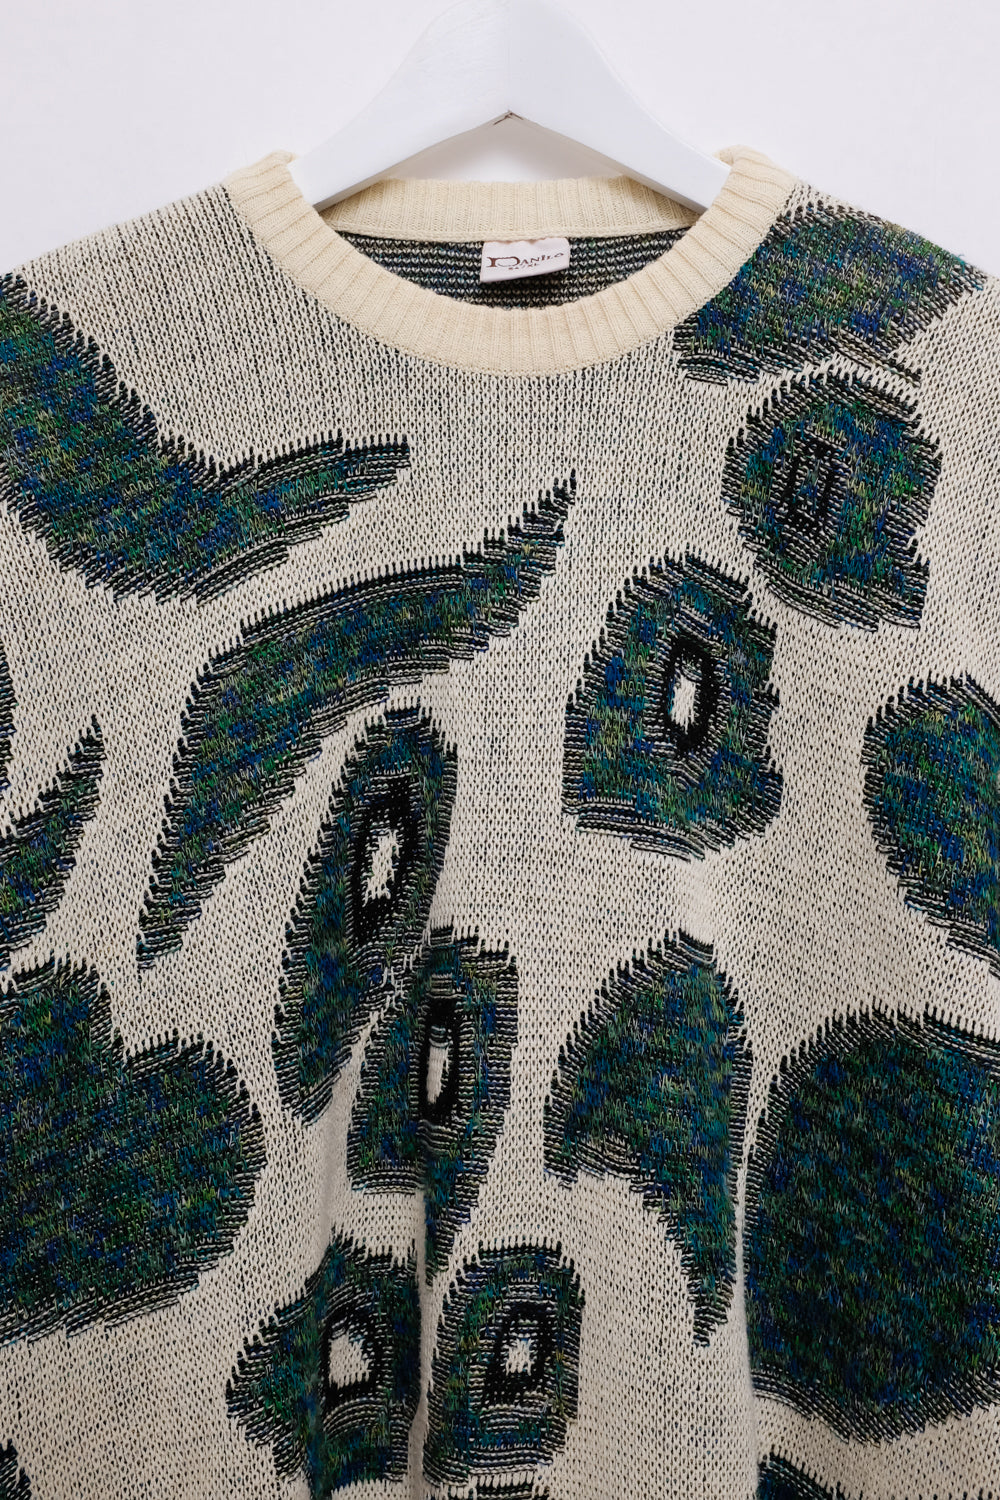 PEACOCK VINTAGE KNIT OVER SWEATER